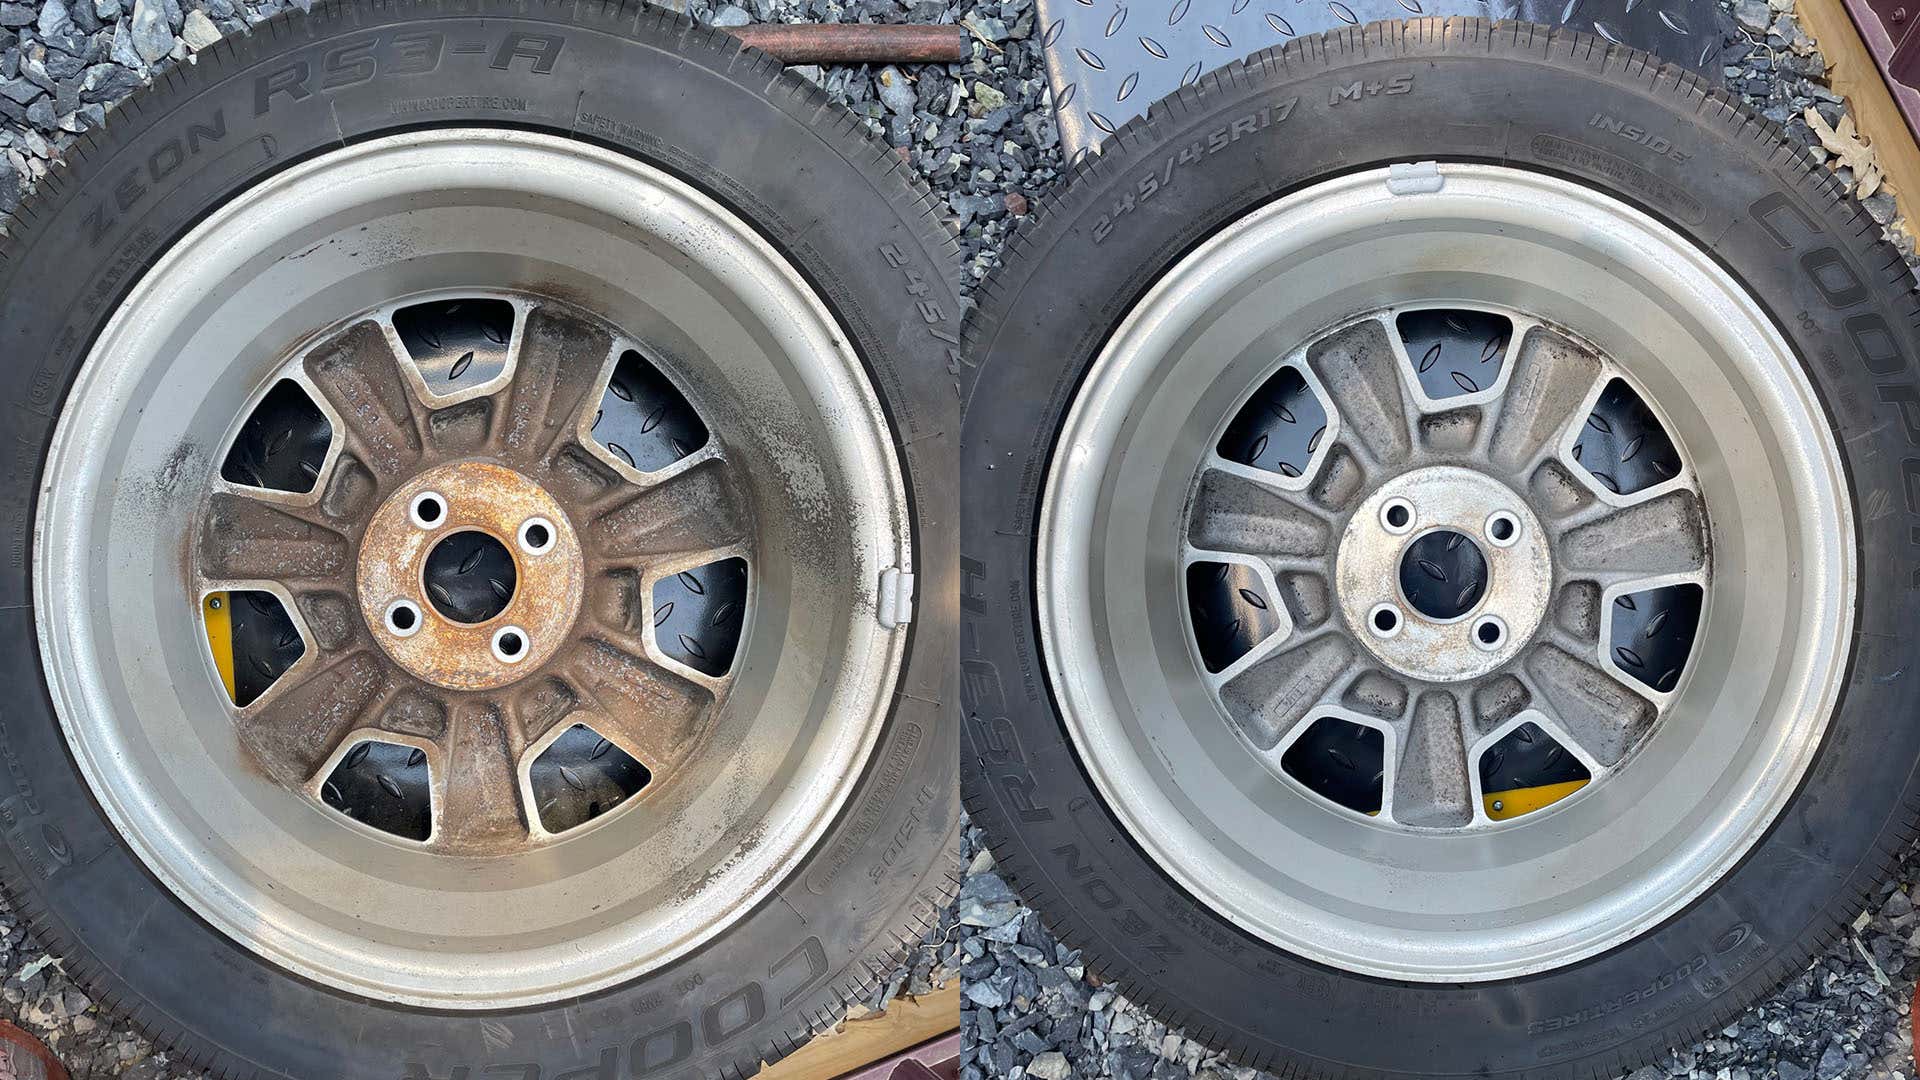 Two side-by-side images of a car's wheel before and after dry ice cleaning.